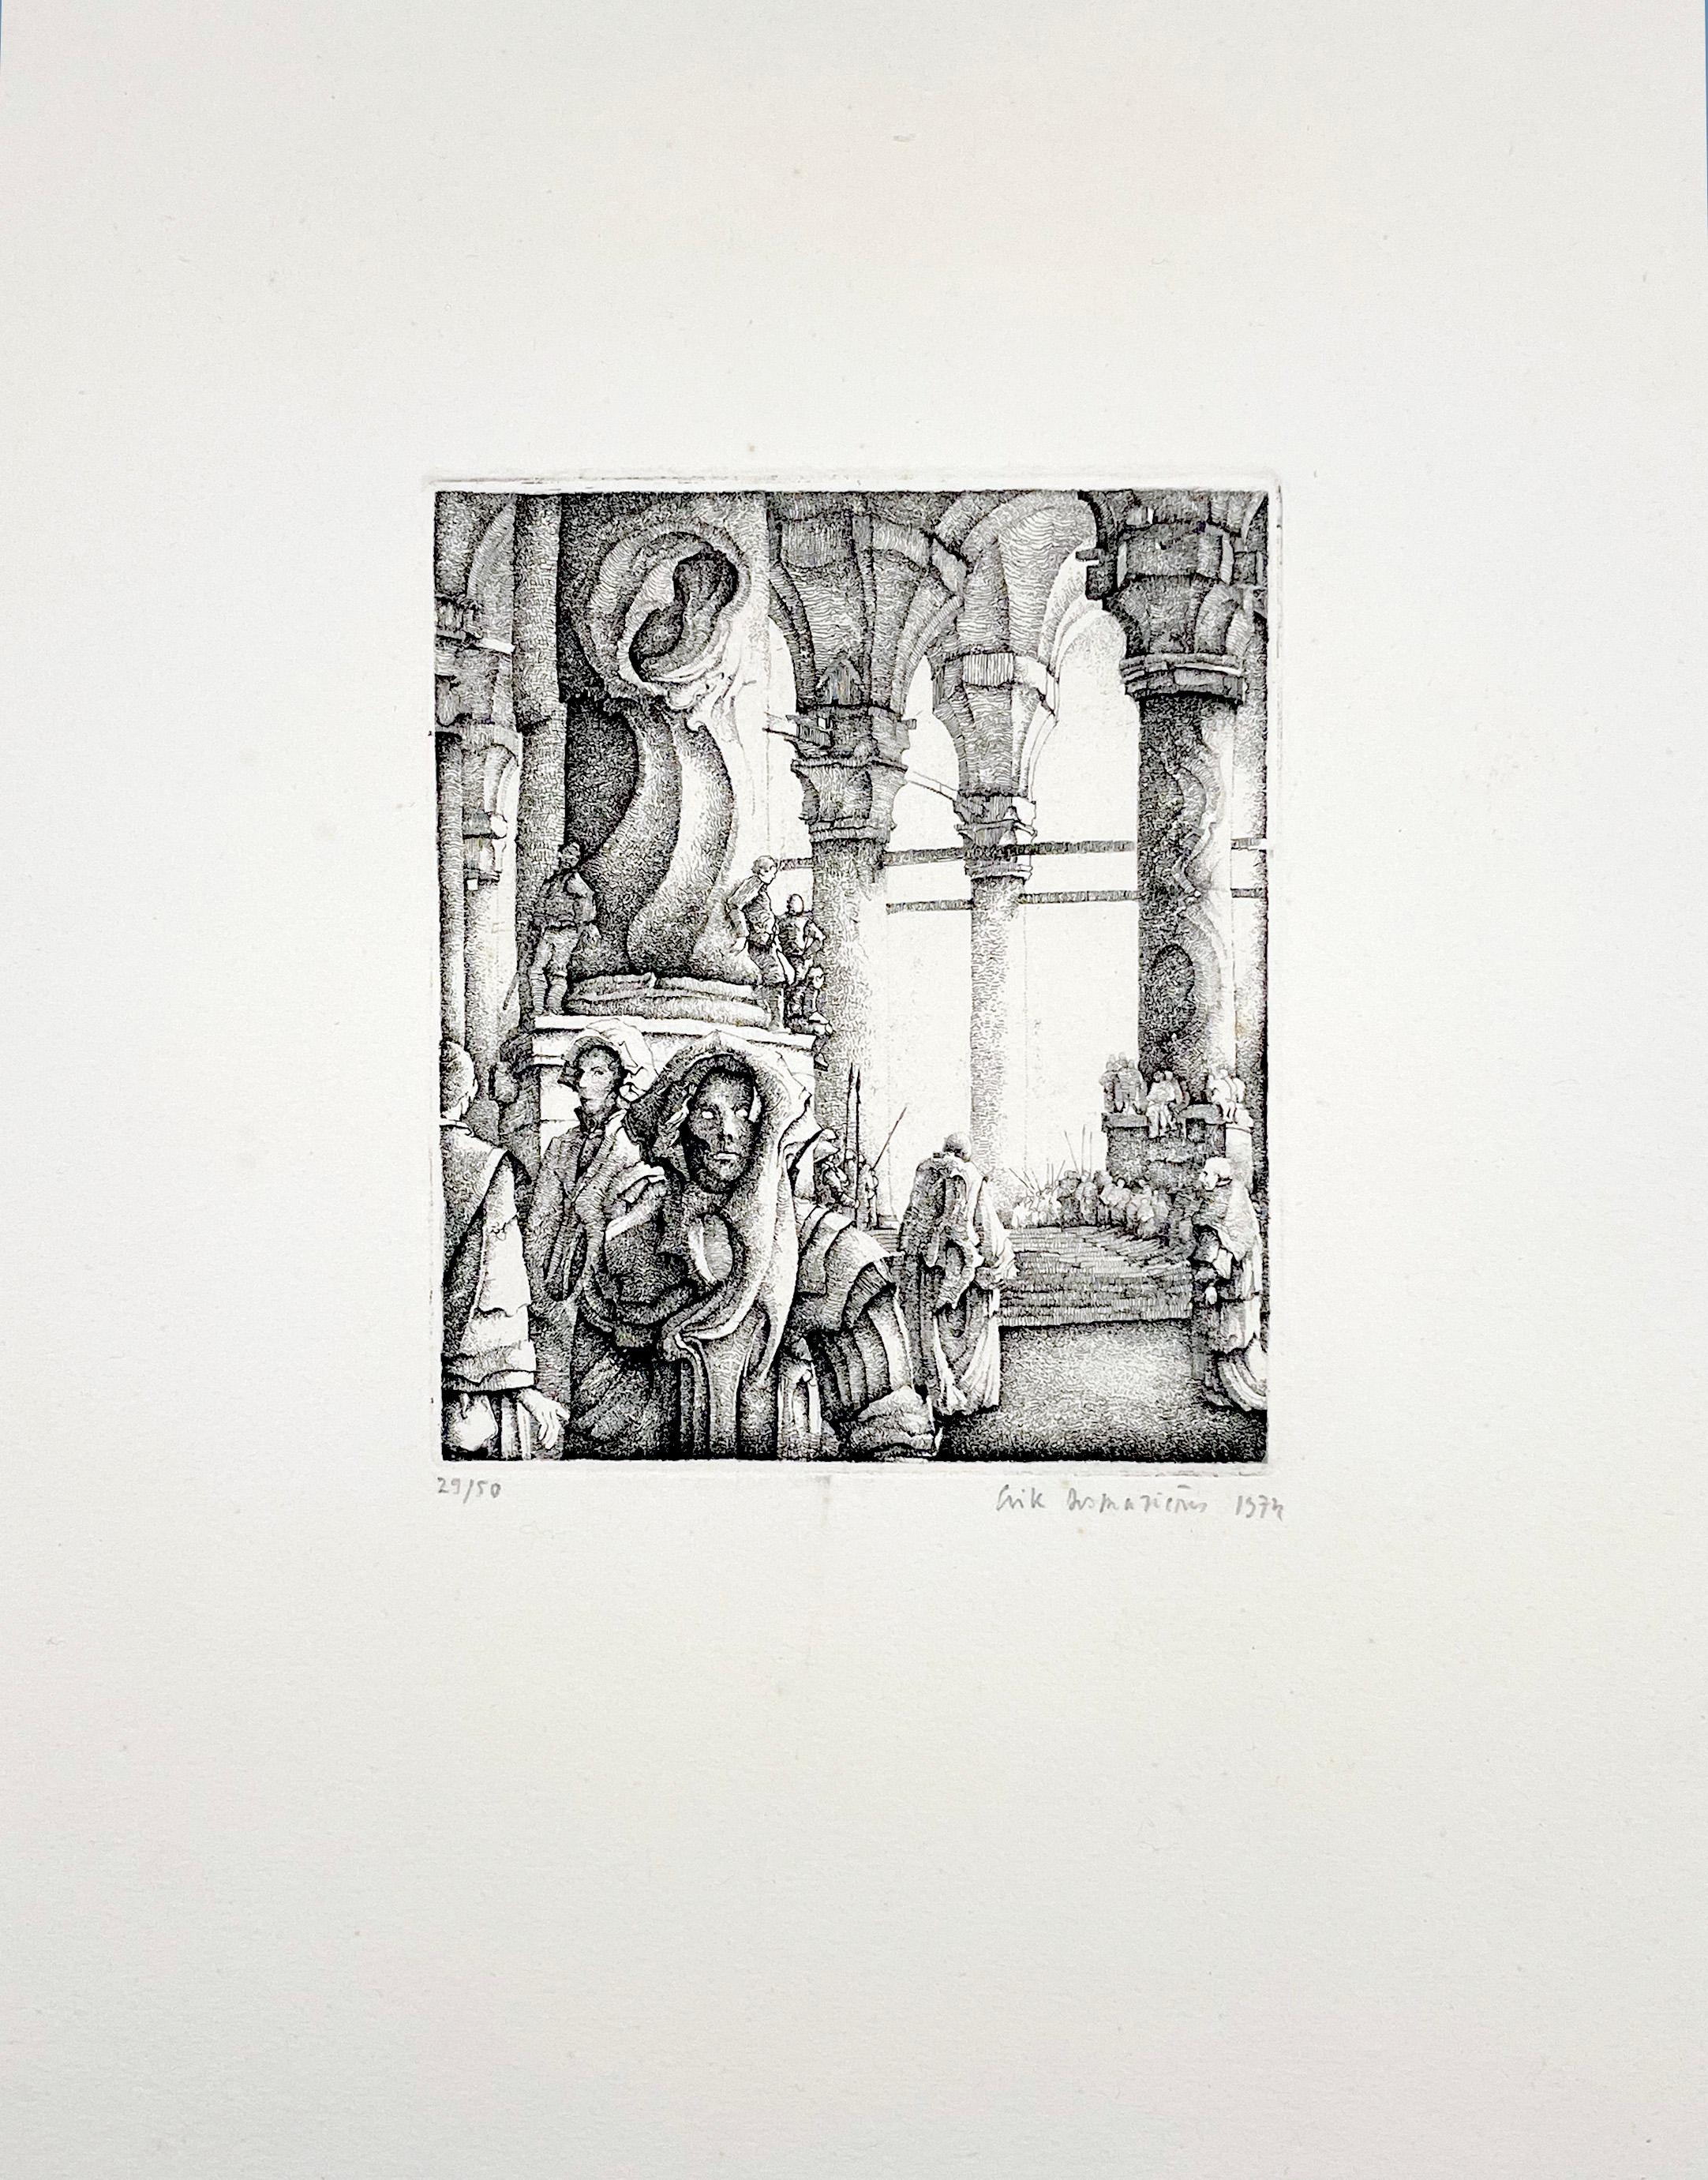 Signed, dated and numbered from the edition of 50. One of the artists earliest etchings.

Erik Desmazières is considered one of the greatest contemporary printmakers, and has had more than 10 museum retrospectives in Europe, Canada and the United